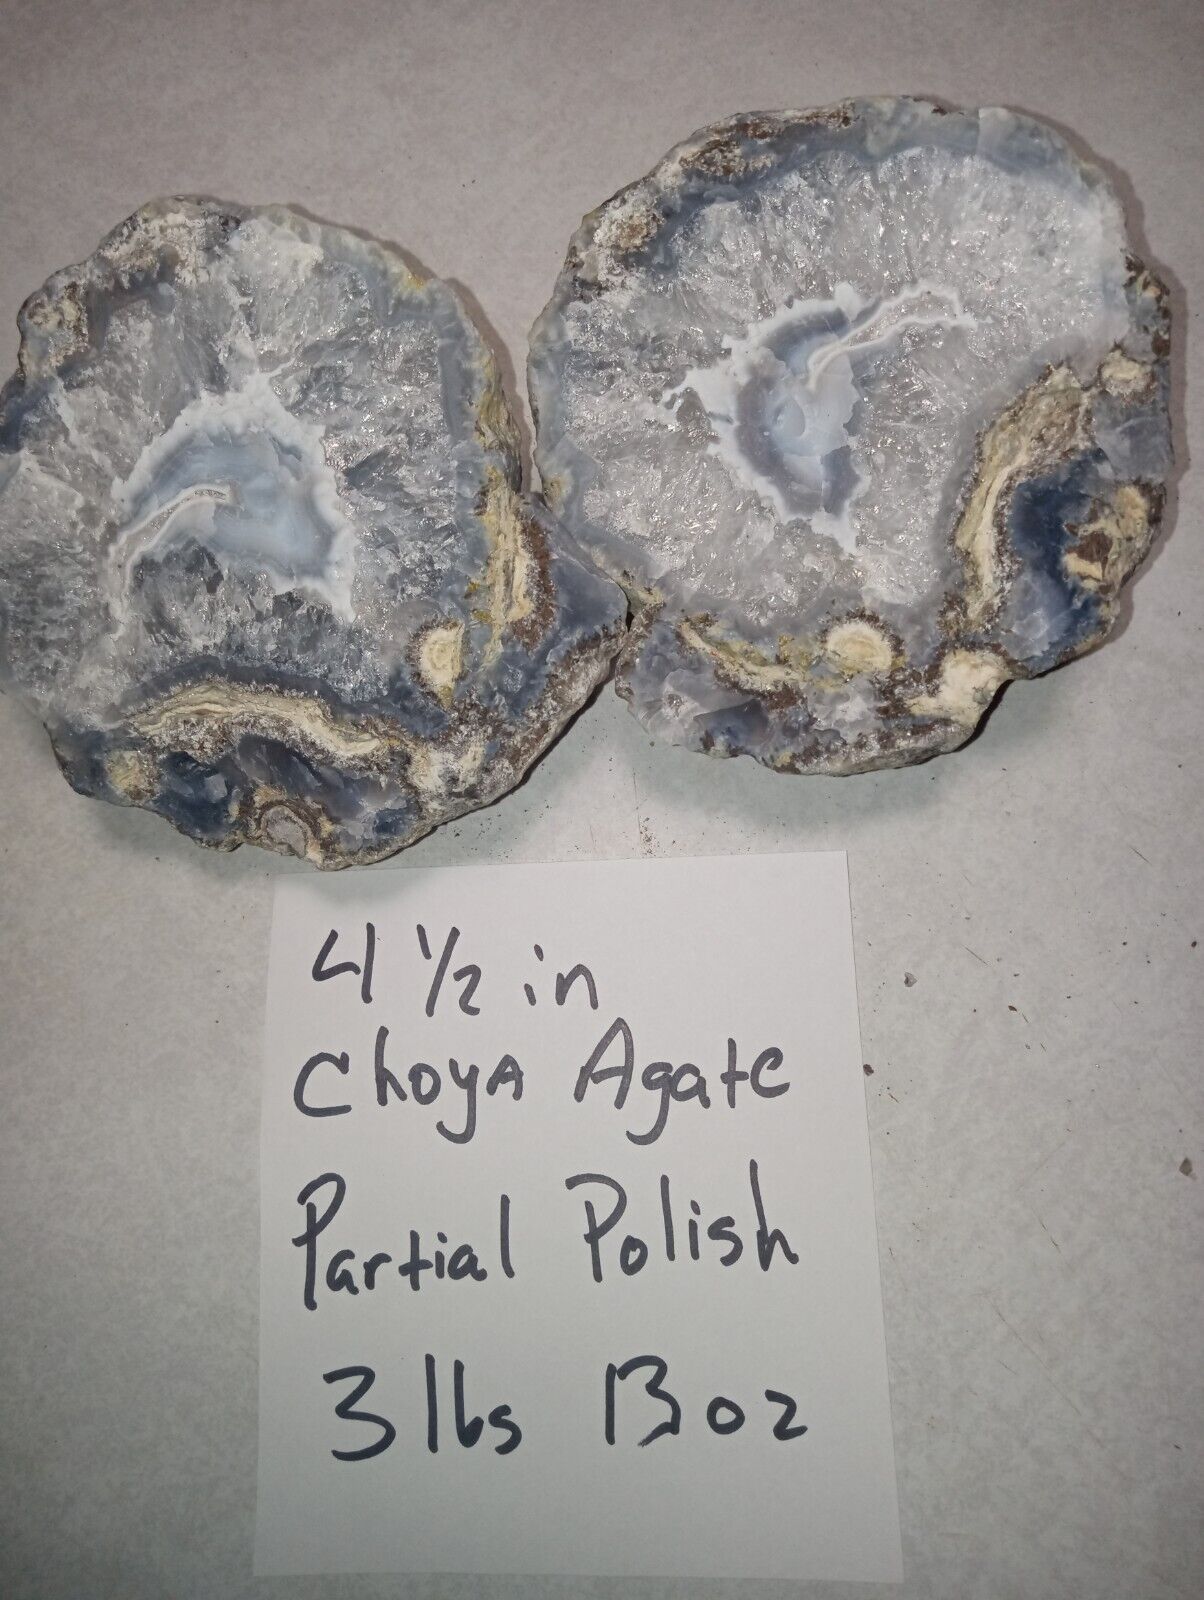 4 1/2 in  Agate 3 lbs. 13 oz Partially Polished 